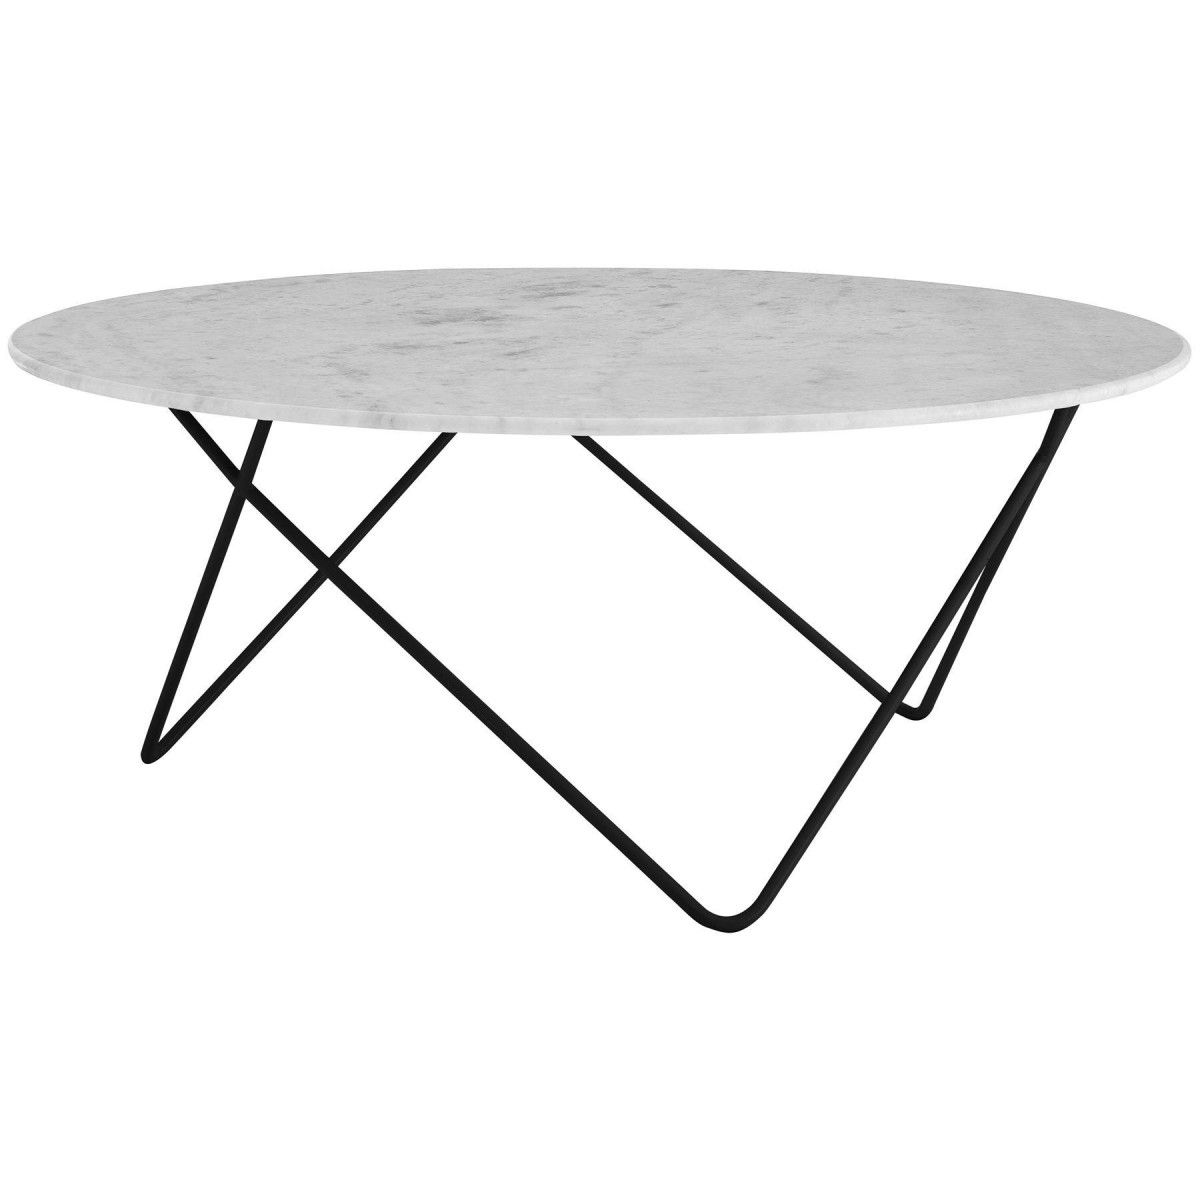 Modern Home – Rolo Round Coffee Table White Marble Black Metal Legs Within Fashionable Black Metal And Marble Coffee Tables (View 7 of 10)